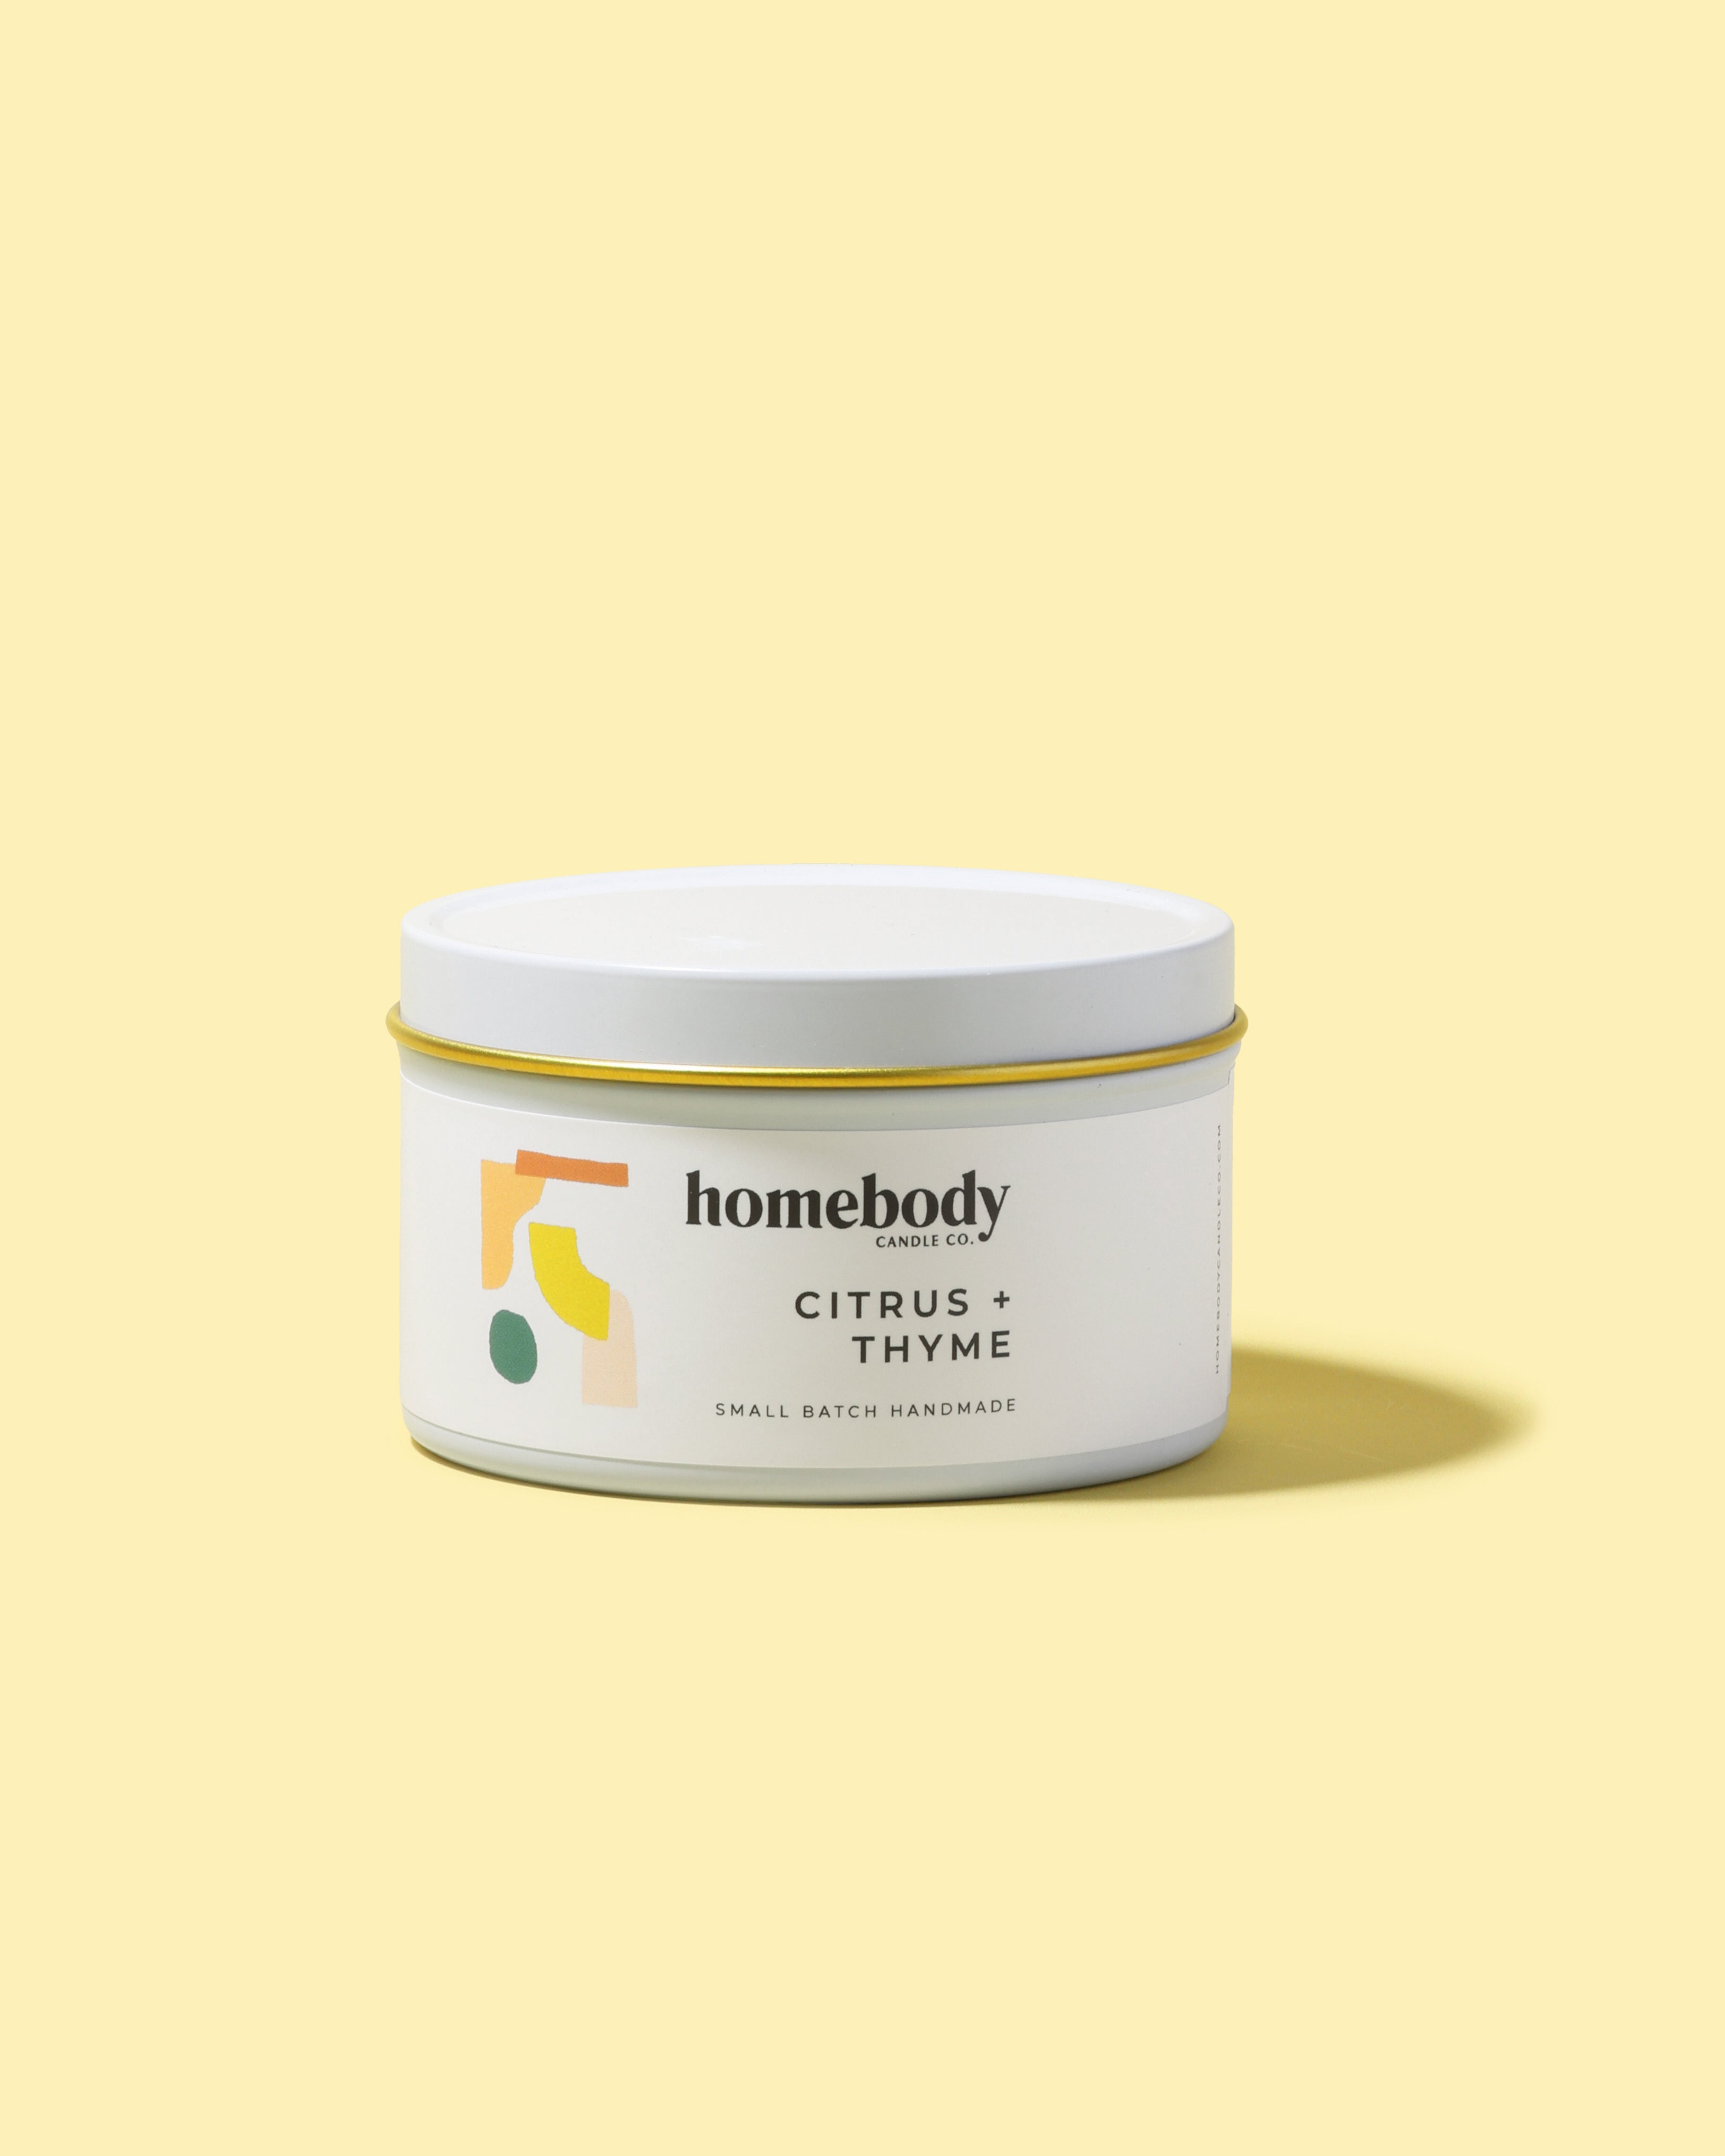 Citrus + Thyme candle tin Homebody Candle Co